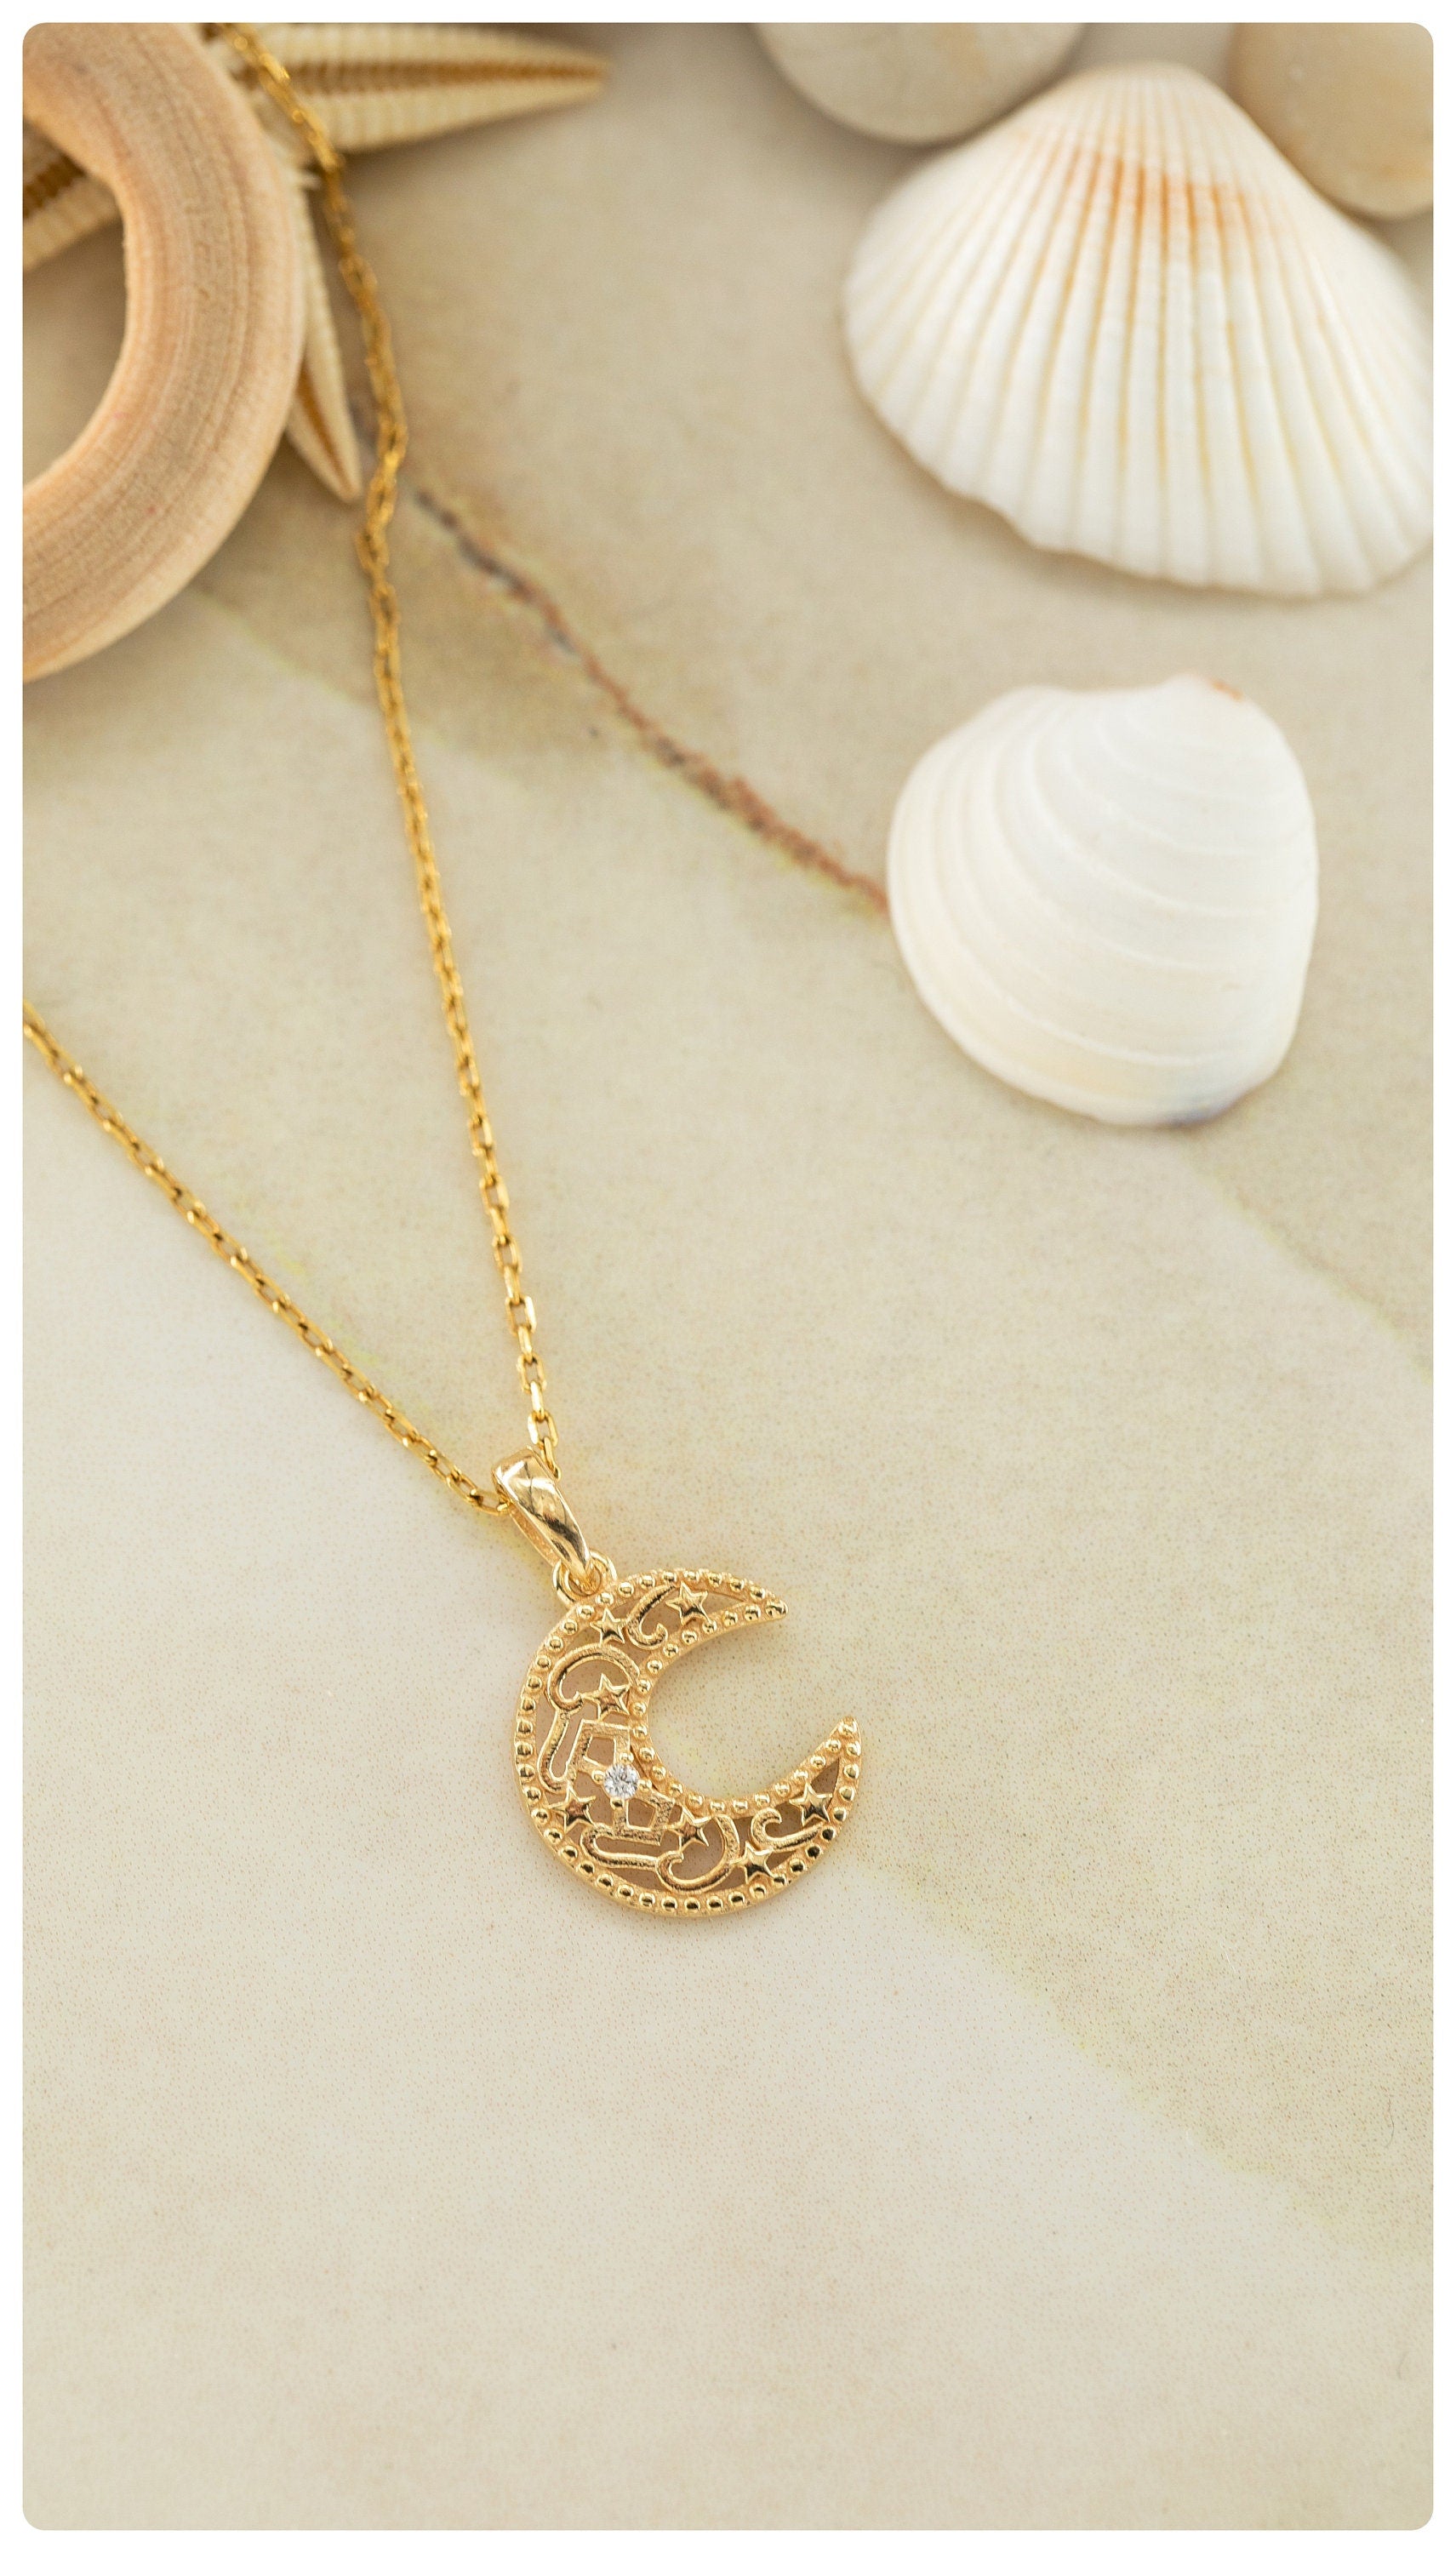 14k Gold Half Moon Necklace Solid Gold Necklace Sterling Silver Crescent Moon Pendant Handmade Celestial Jewelry Lunar Necklace Gift for Her